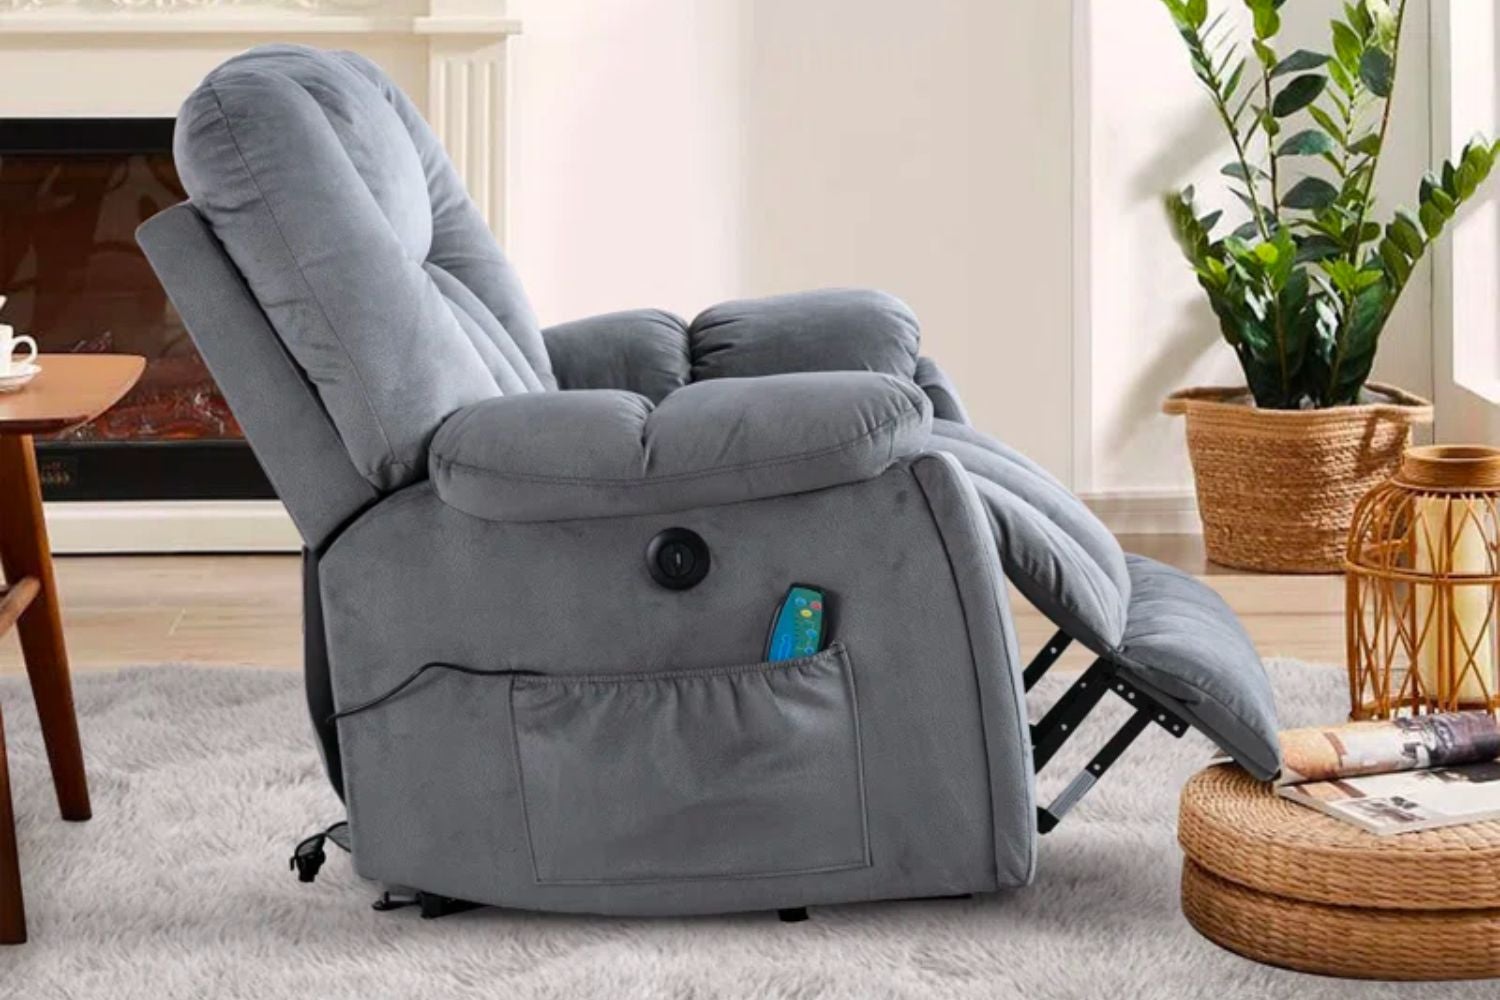 Dreamland Awaits: Discovering the Best Recliner for Sleeping缩略图